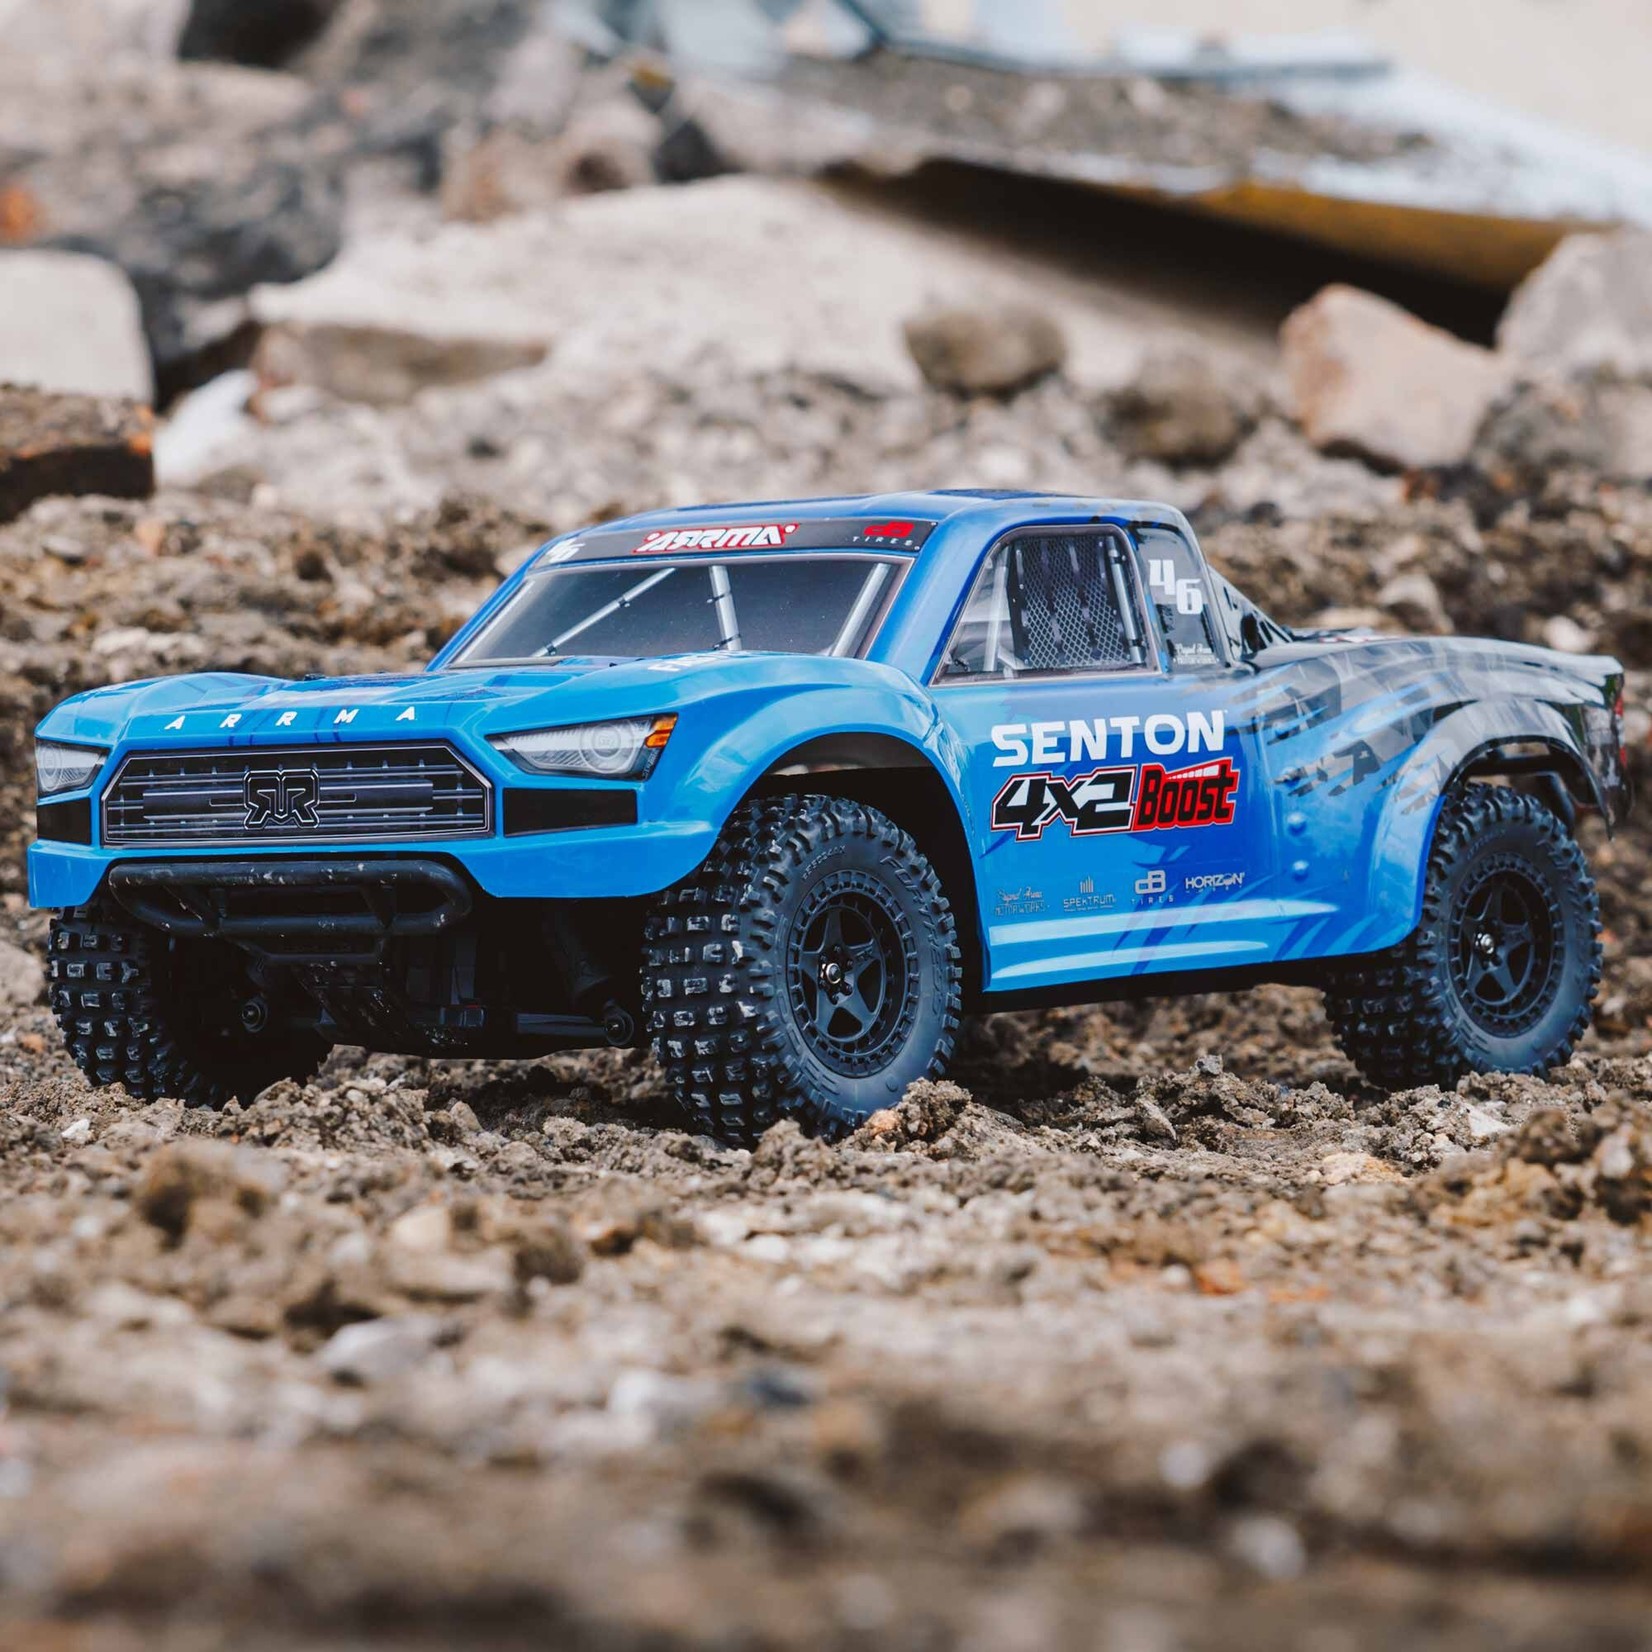 Arrma 1/10 SENTON 4X2 BOOST MEGA 550 Brushed Short Course Truck RTR with Battery & Charger, Blue